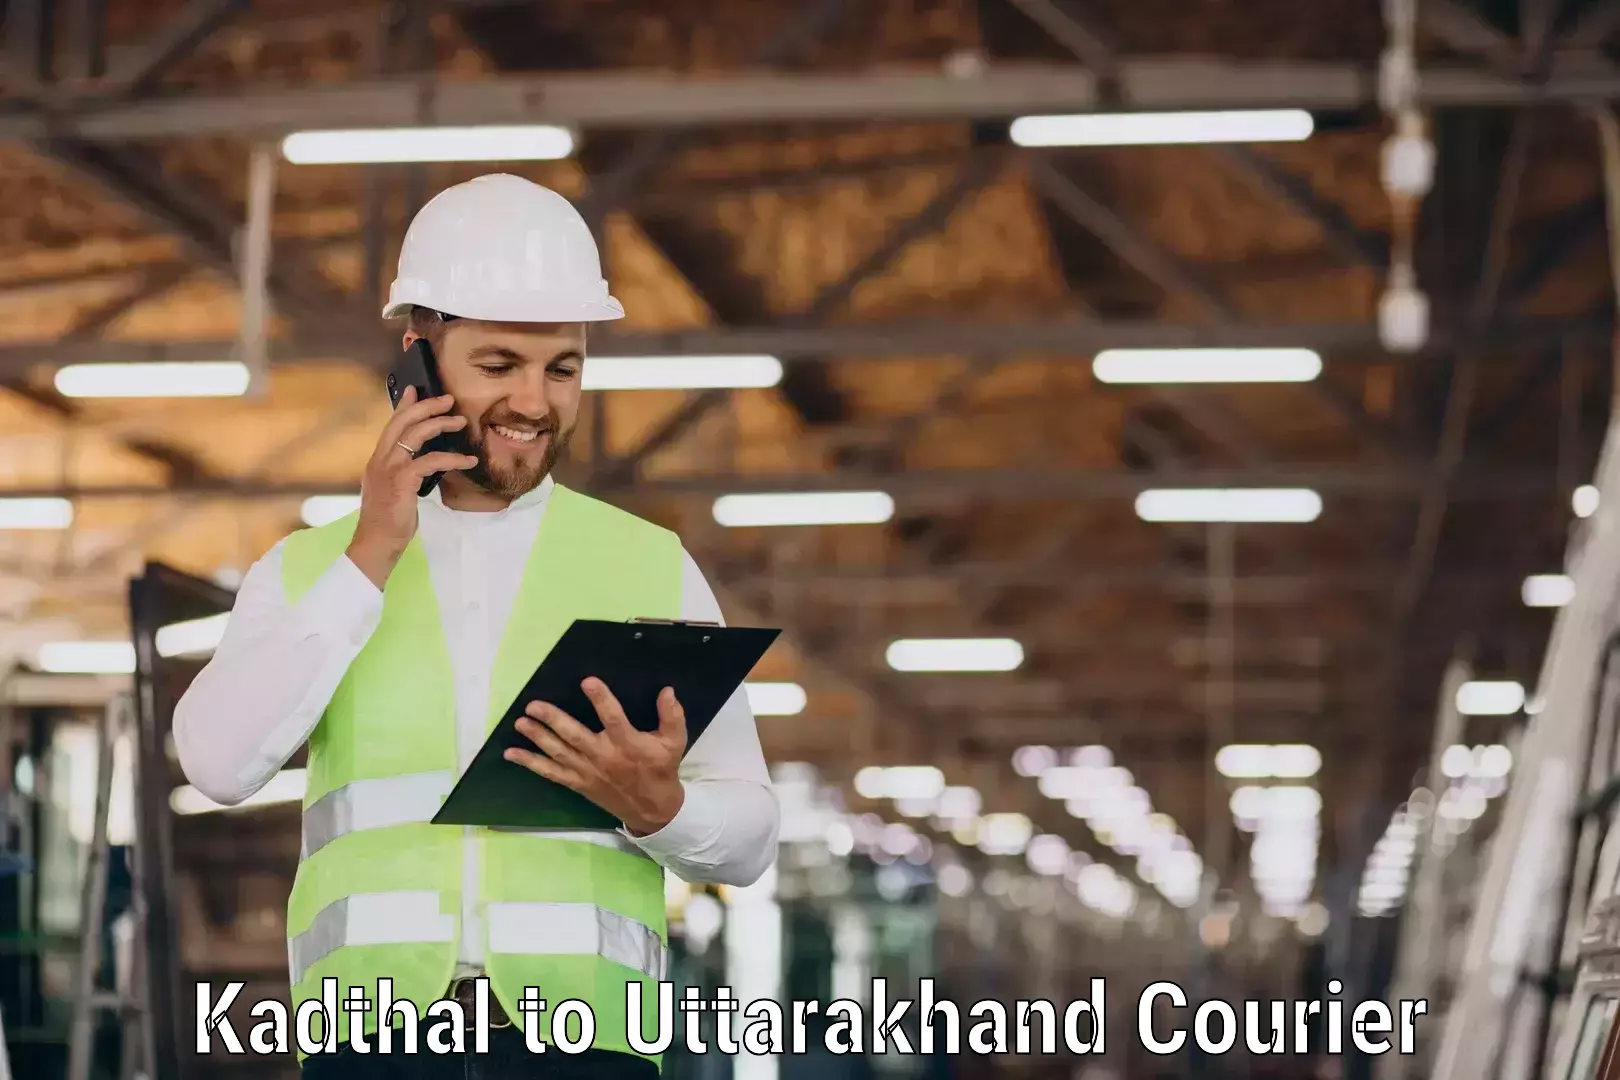 Large-scale shipping solutions Kadthal to Uttarakhand